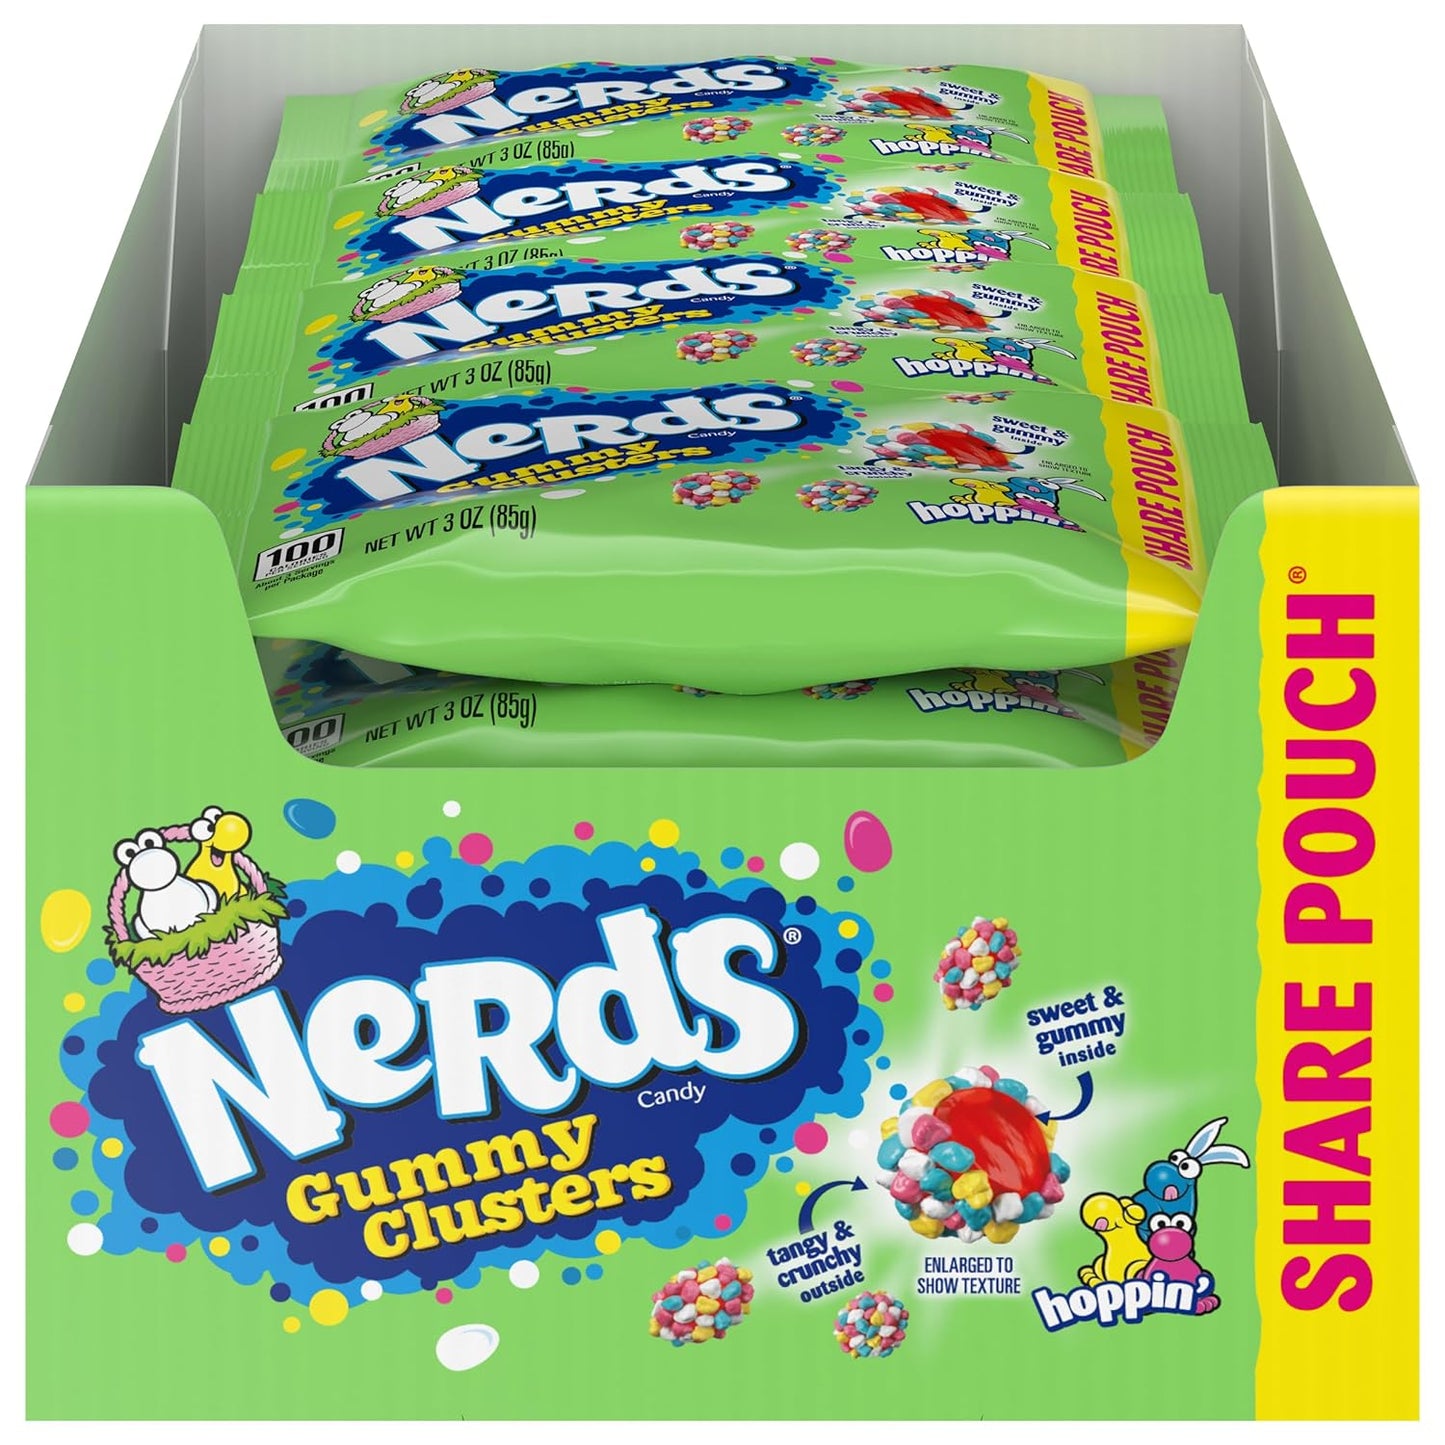 Nerds Hoppin' Gummy Clusters, Easter Candy, 3 ounce sharepack, 12 count